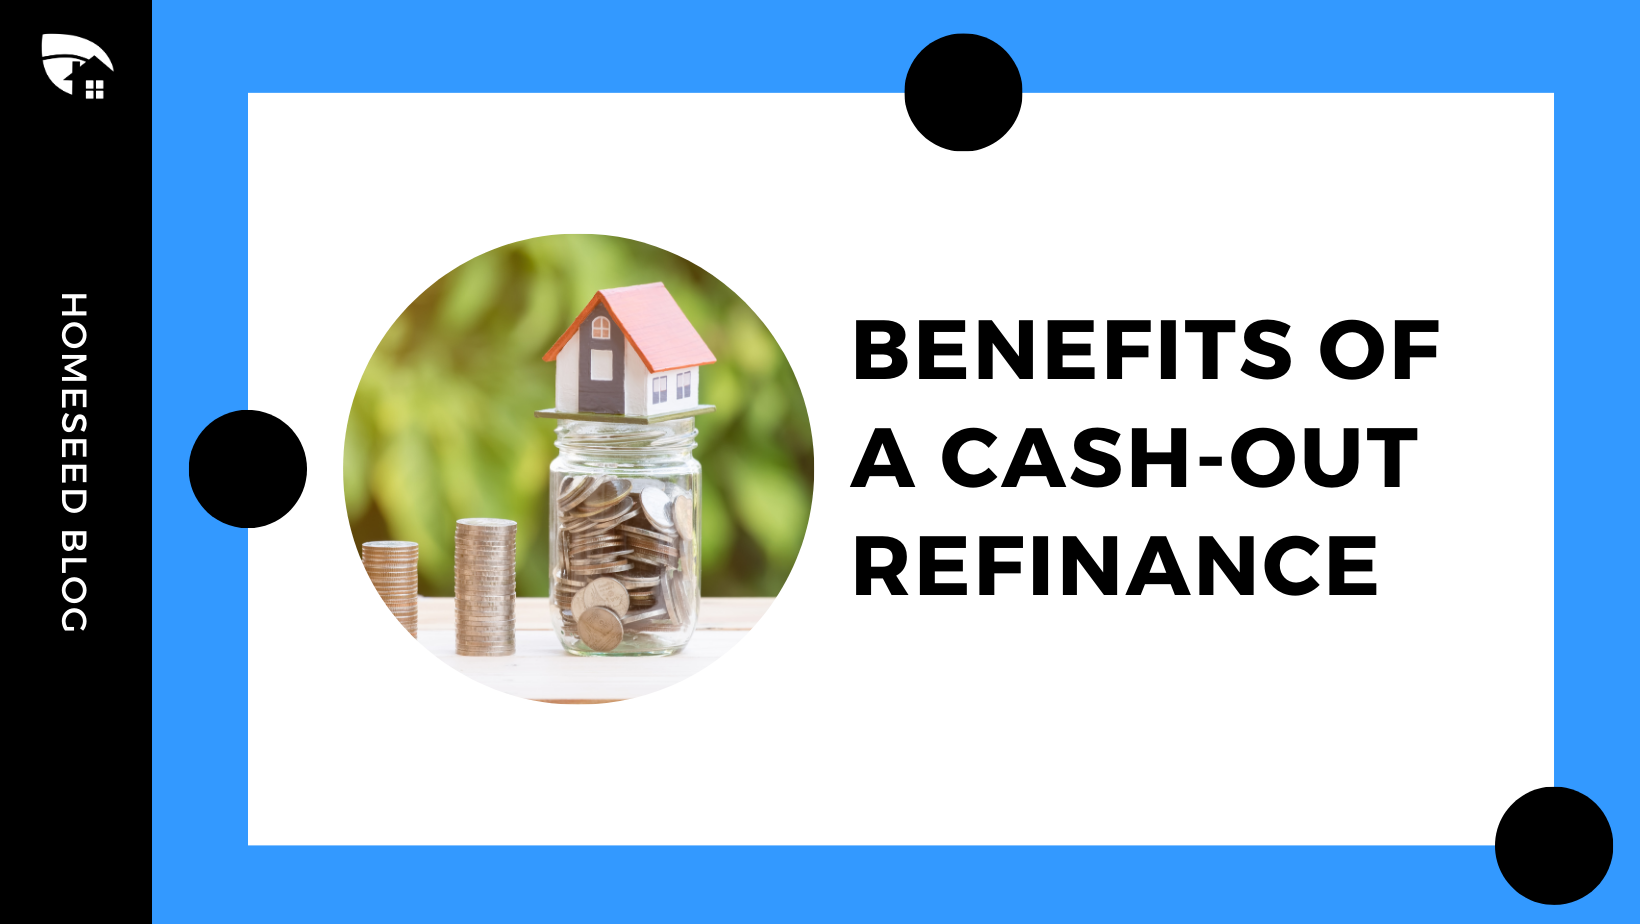 The Benefits of a Cash-Out Refinance